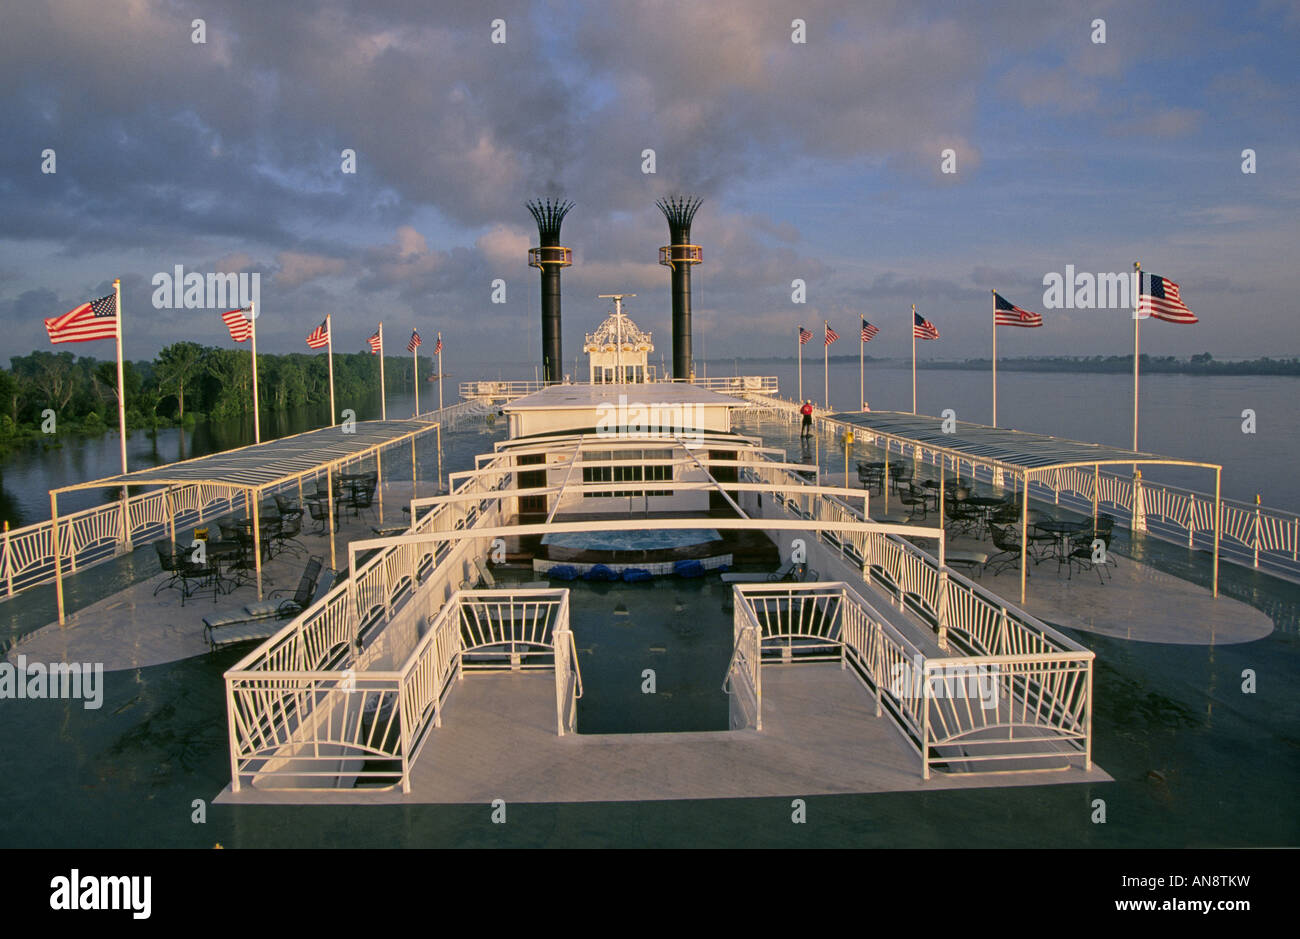 USA TENNESSEE A view of the top decks of the paddlewheel steamboat American Queen on the Tennessee River in early morning Stock Photo